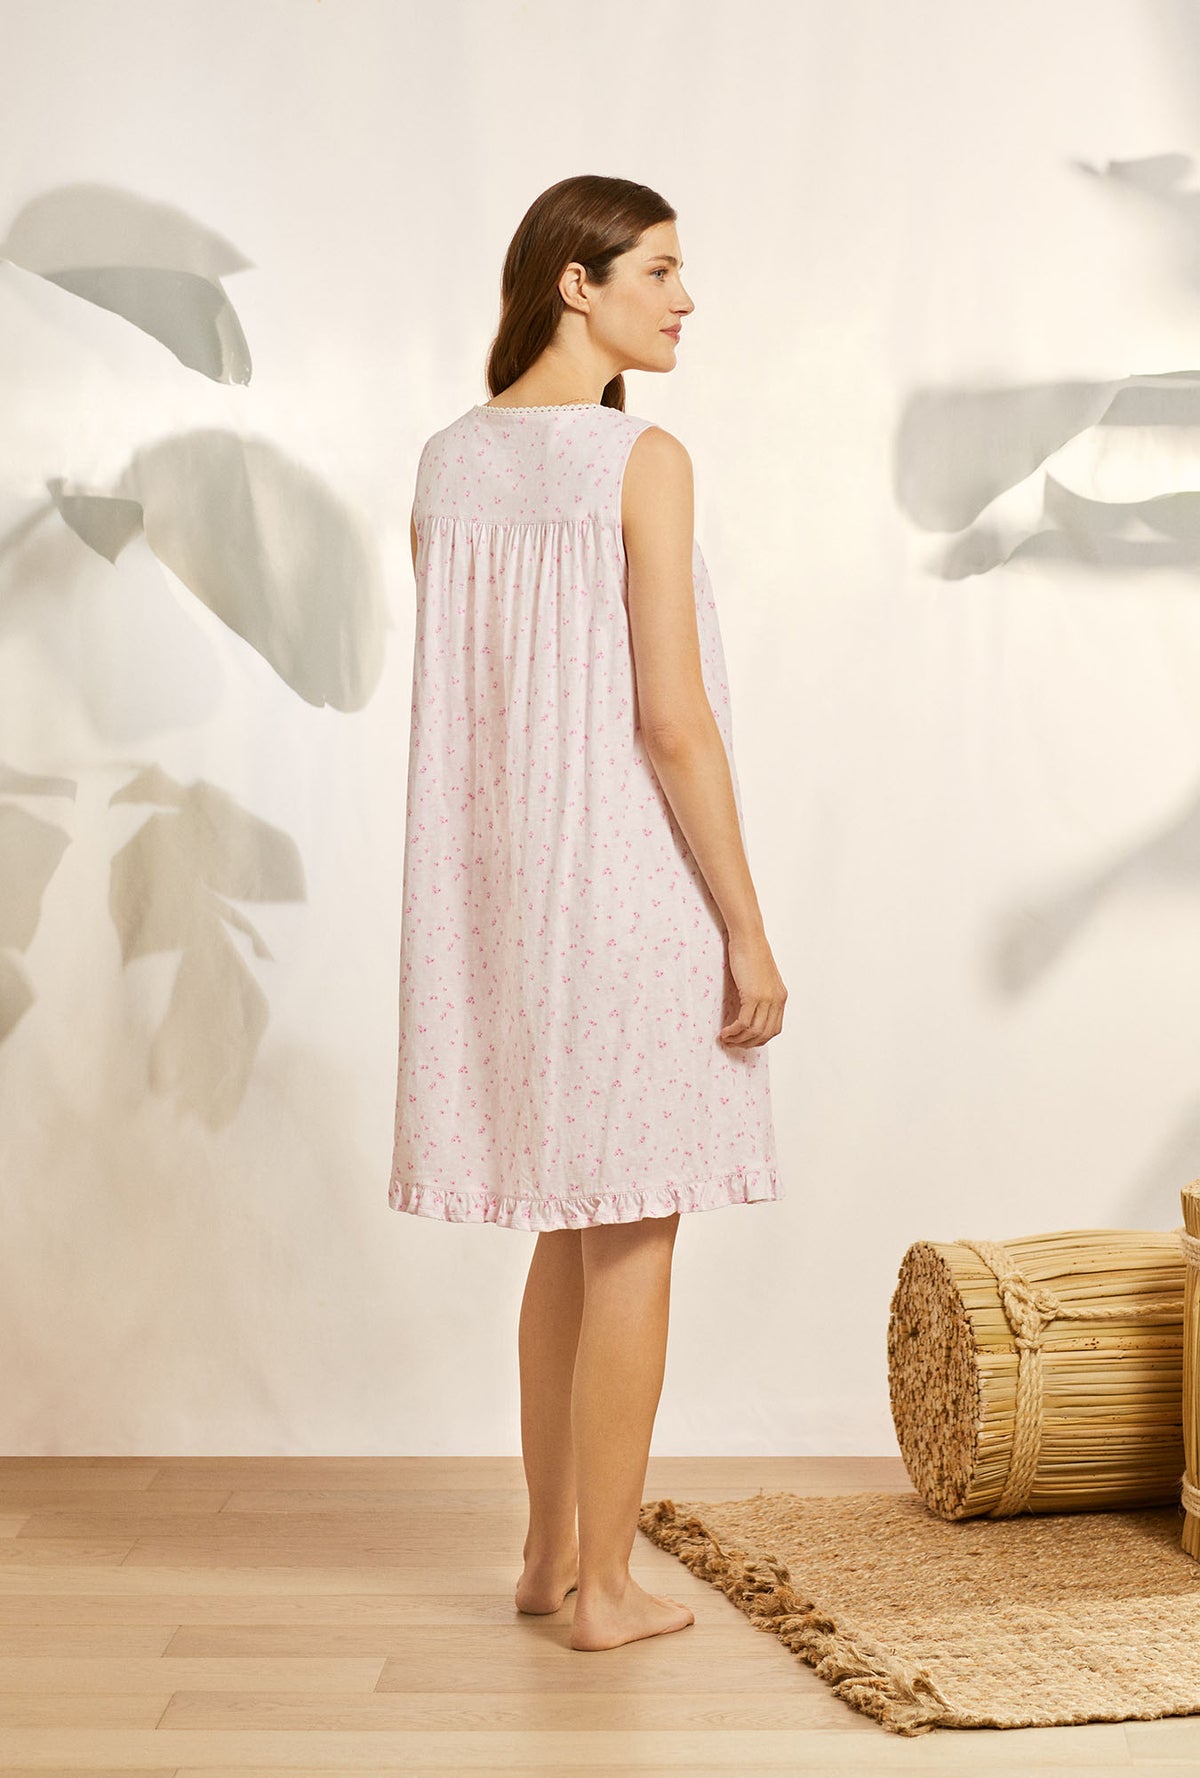 A lady wearing pink sleeveless cotton knit nightgown with blushing pink floral print.